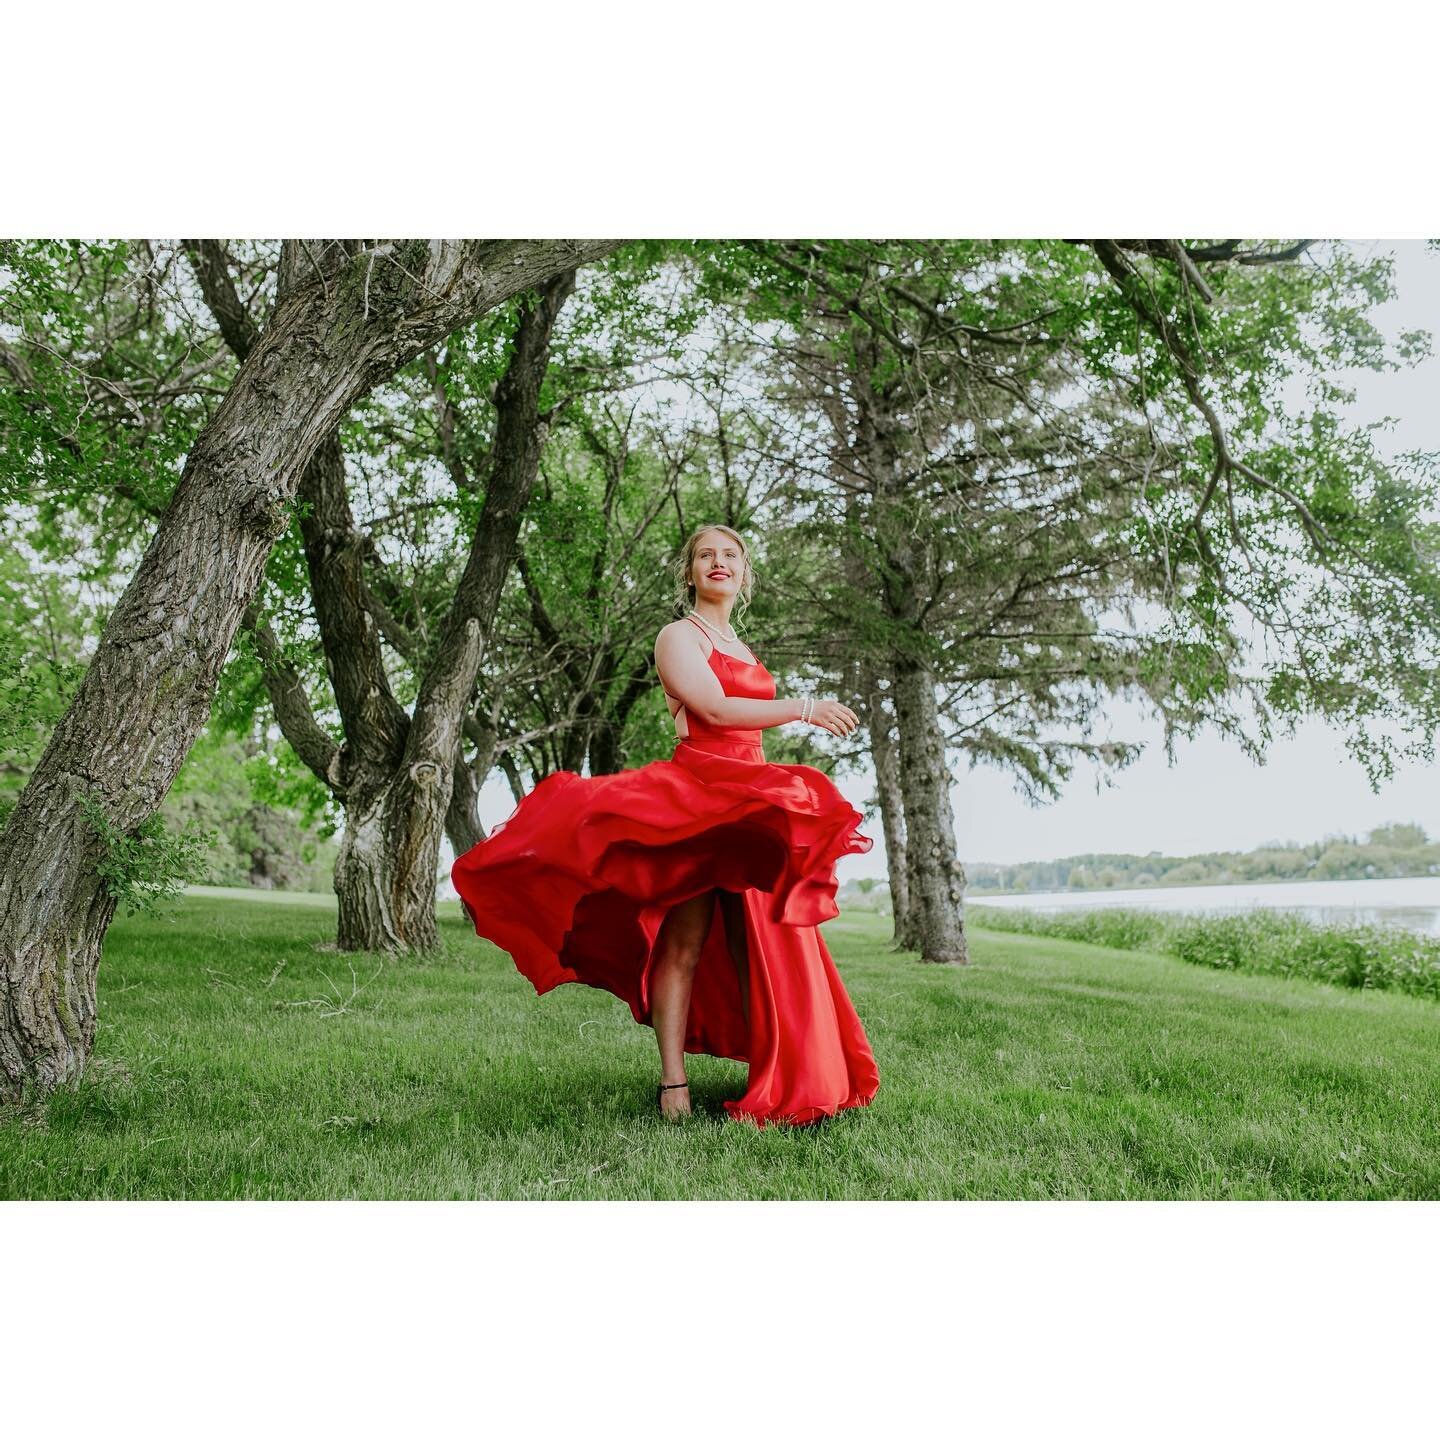 I have no caption today, so let this super cool dress flip speak for itself. You know why? Because it&rsquo;s awesome! Haha 
&bull;
#grad #gradseniors #graduation #graddress #graduation #seniorportraits #instagrad #graddresses #dress #suit #instafash